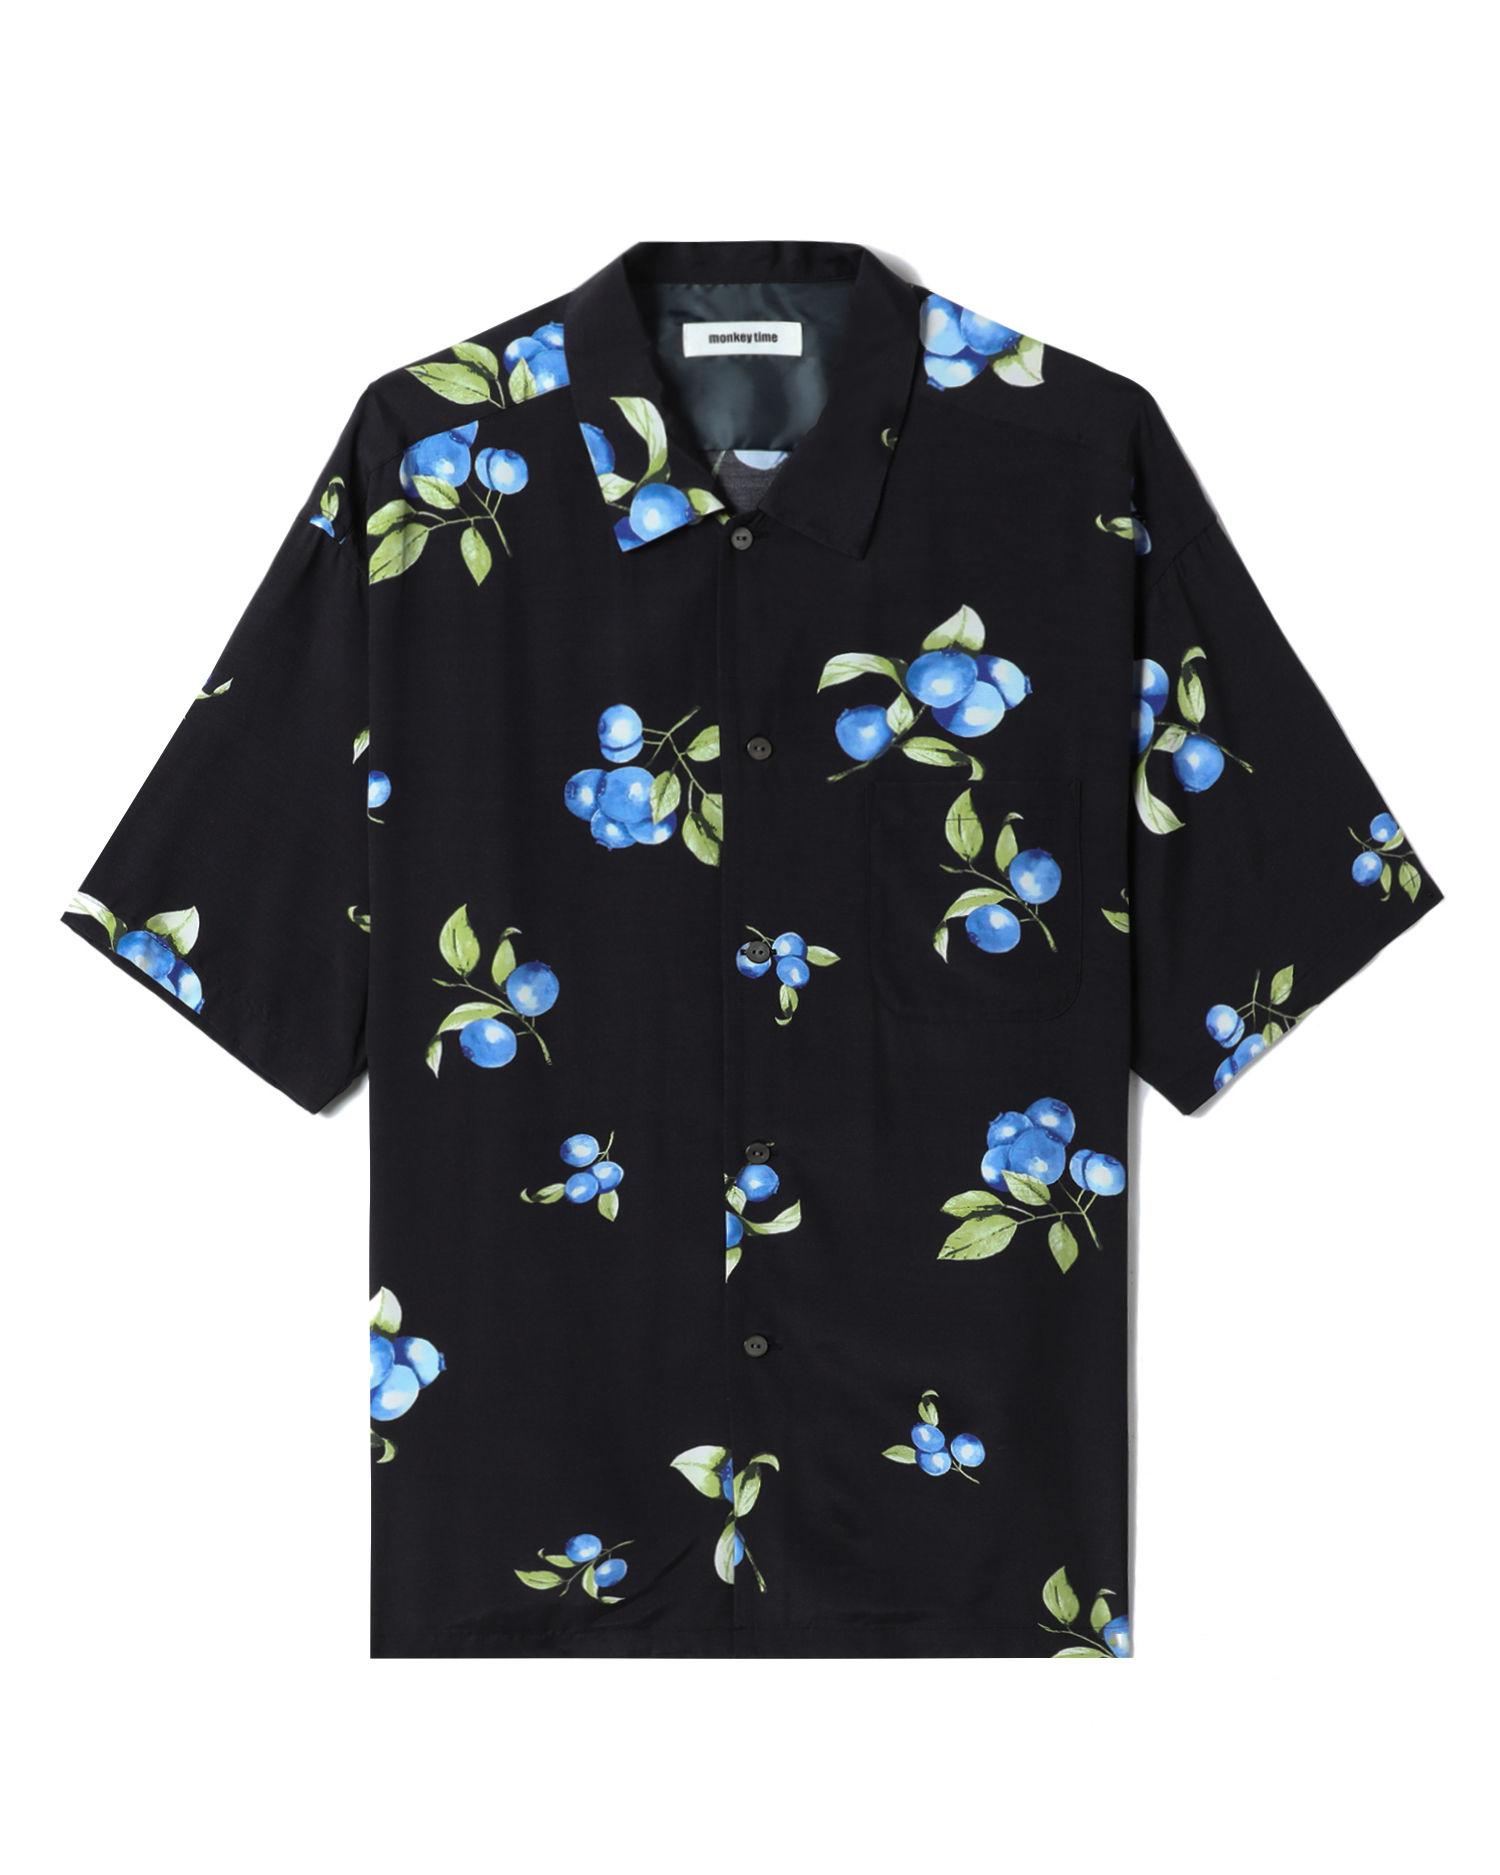 Floral short sleeve shirt by BEAUTY&YOUTH MONKEY TIME